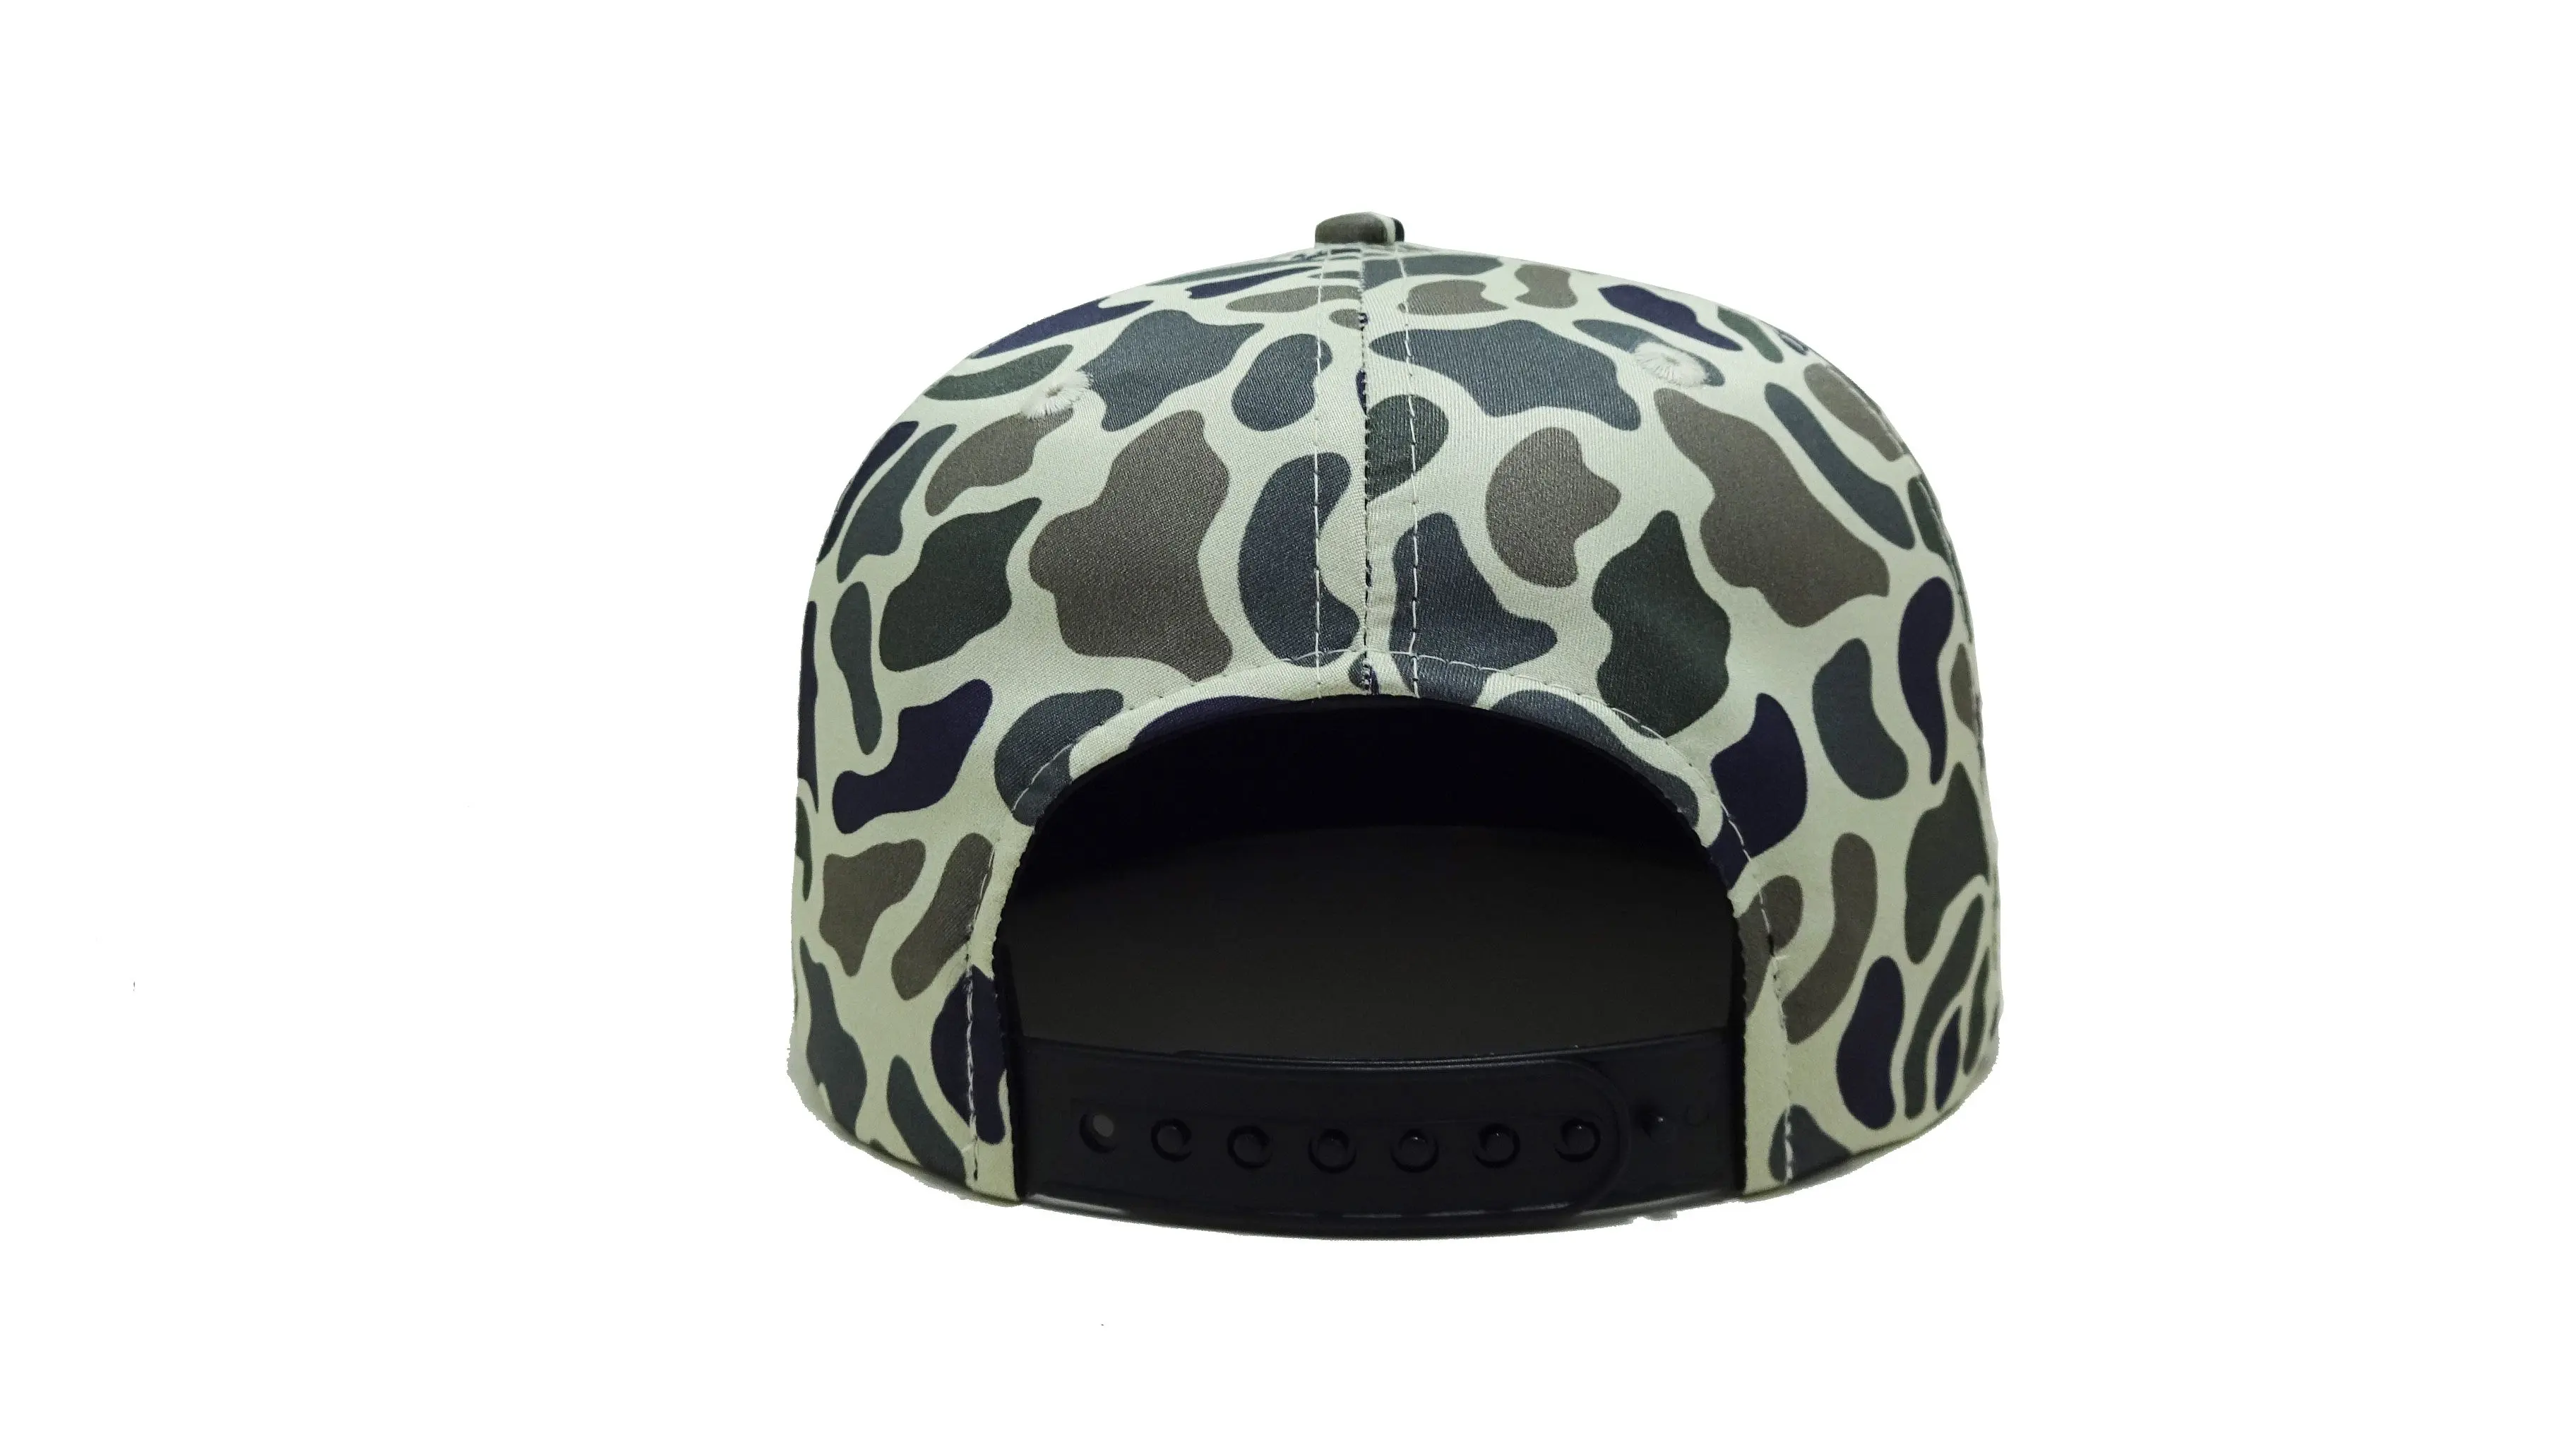 Customized Logo Woven Patch Camo Snapback 5 Panel With Rope Injae Vina Made Hats High Printing Camo Color Vietnam Hats